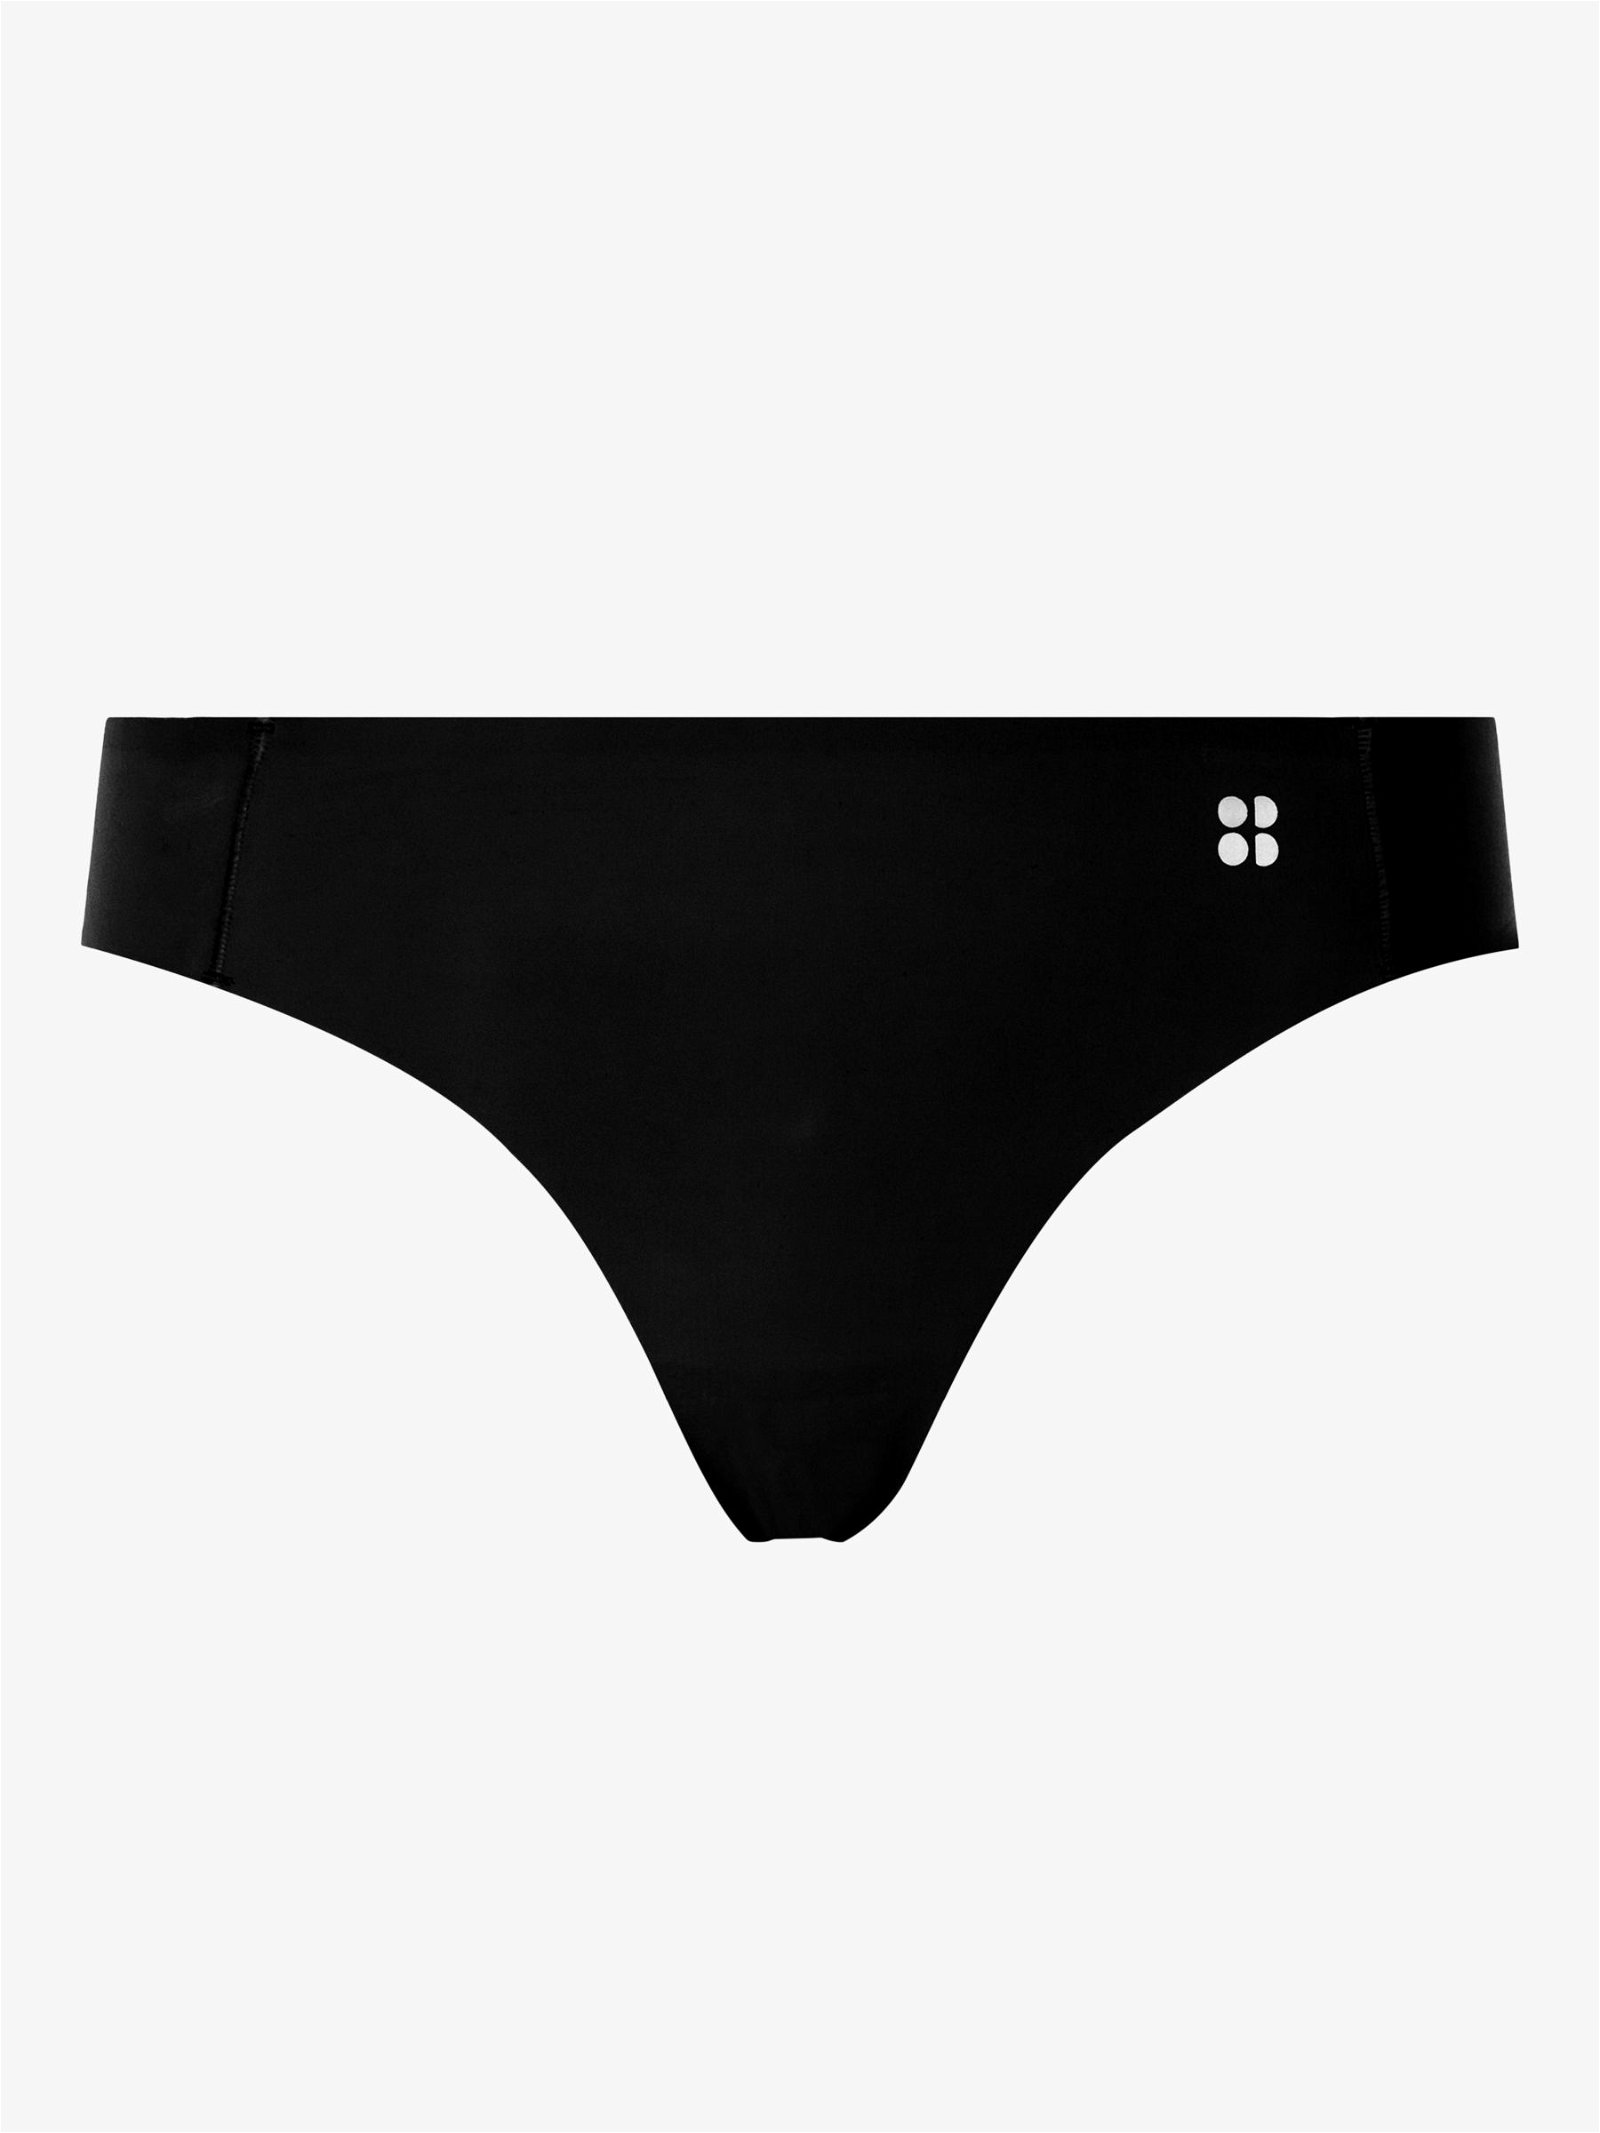 Sweaty Betty Barely There Knickers, Pack of 3, Black, XS